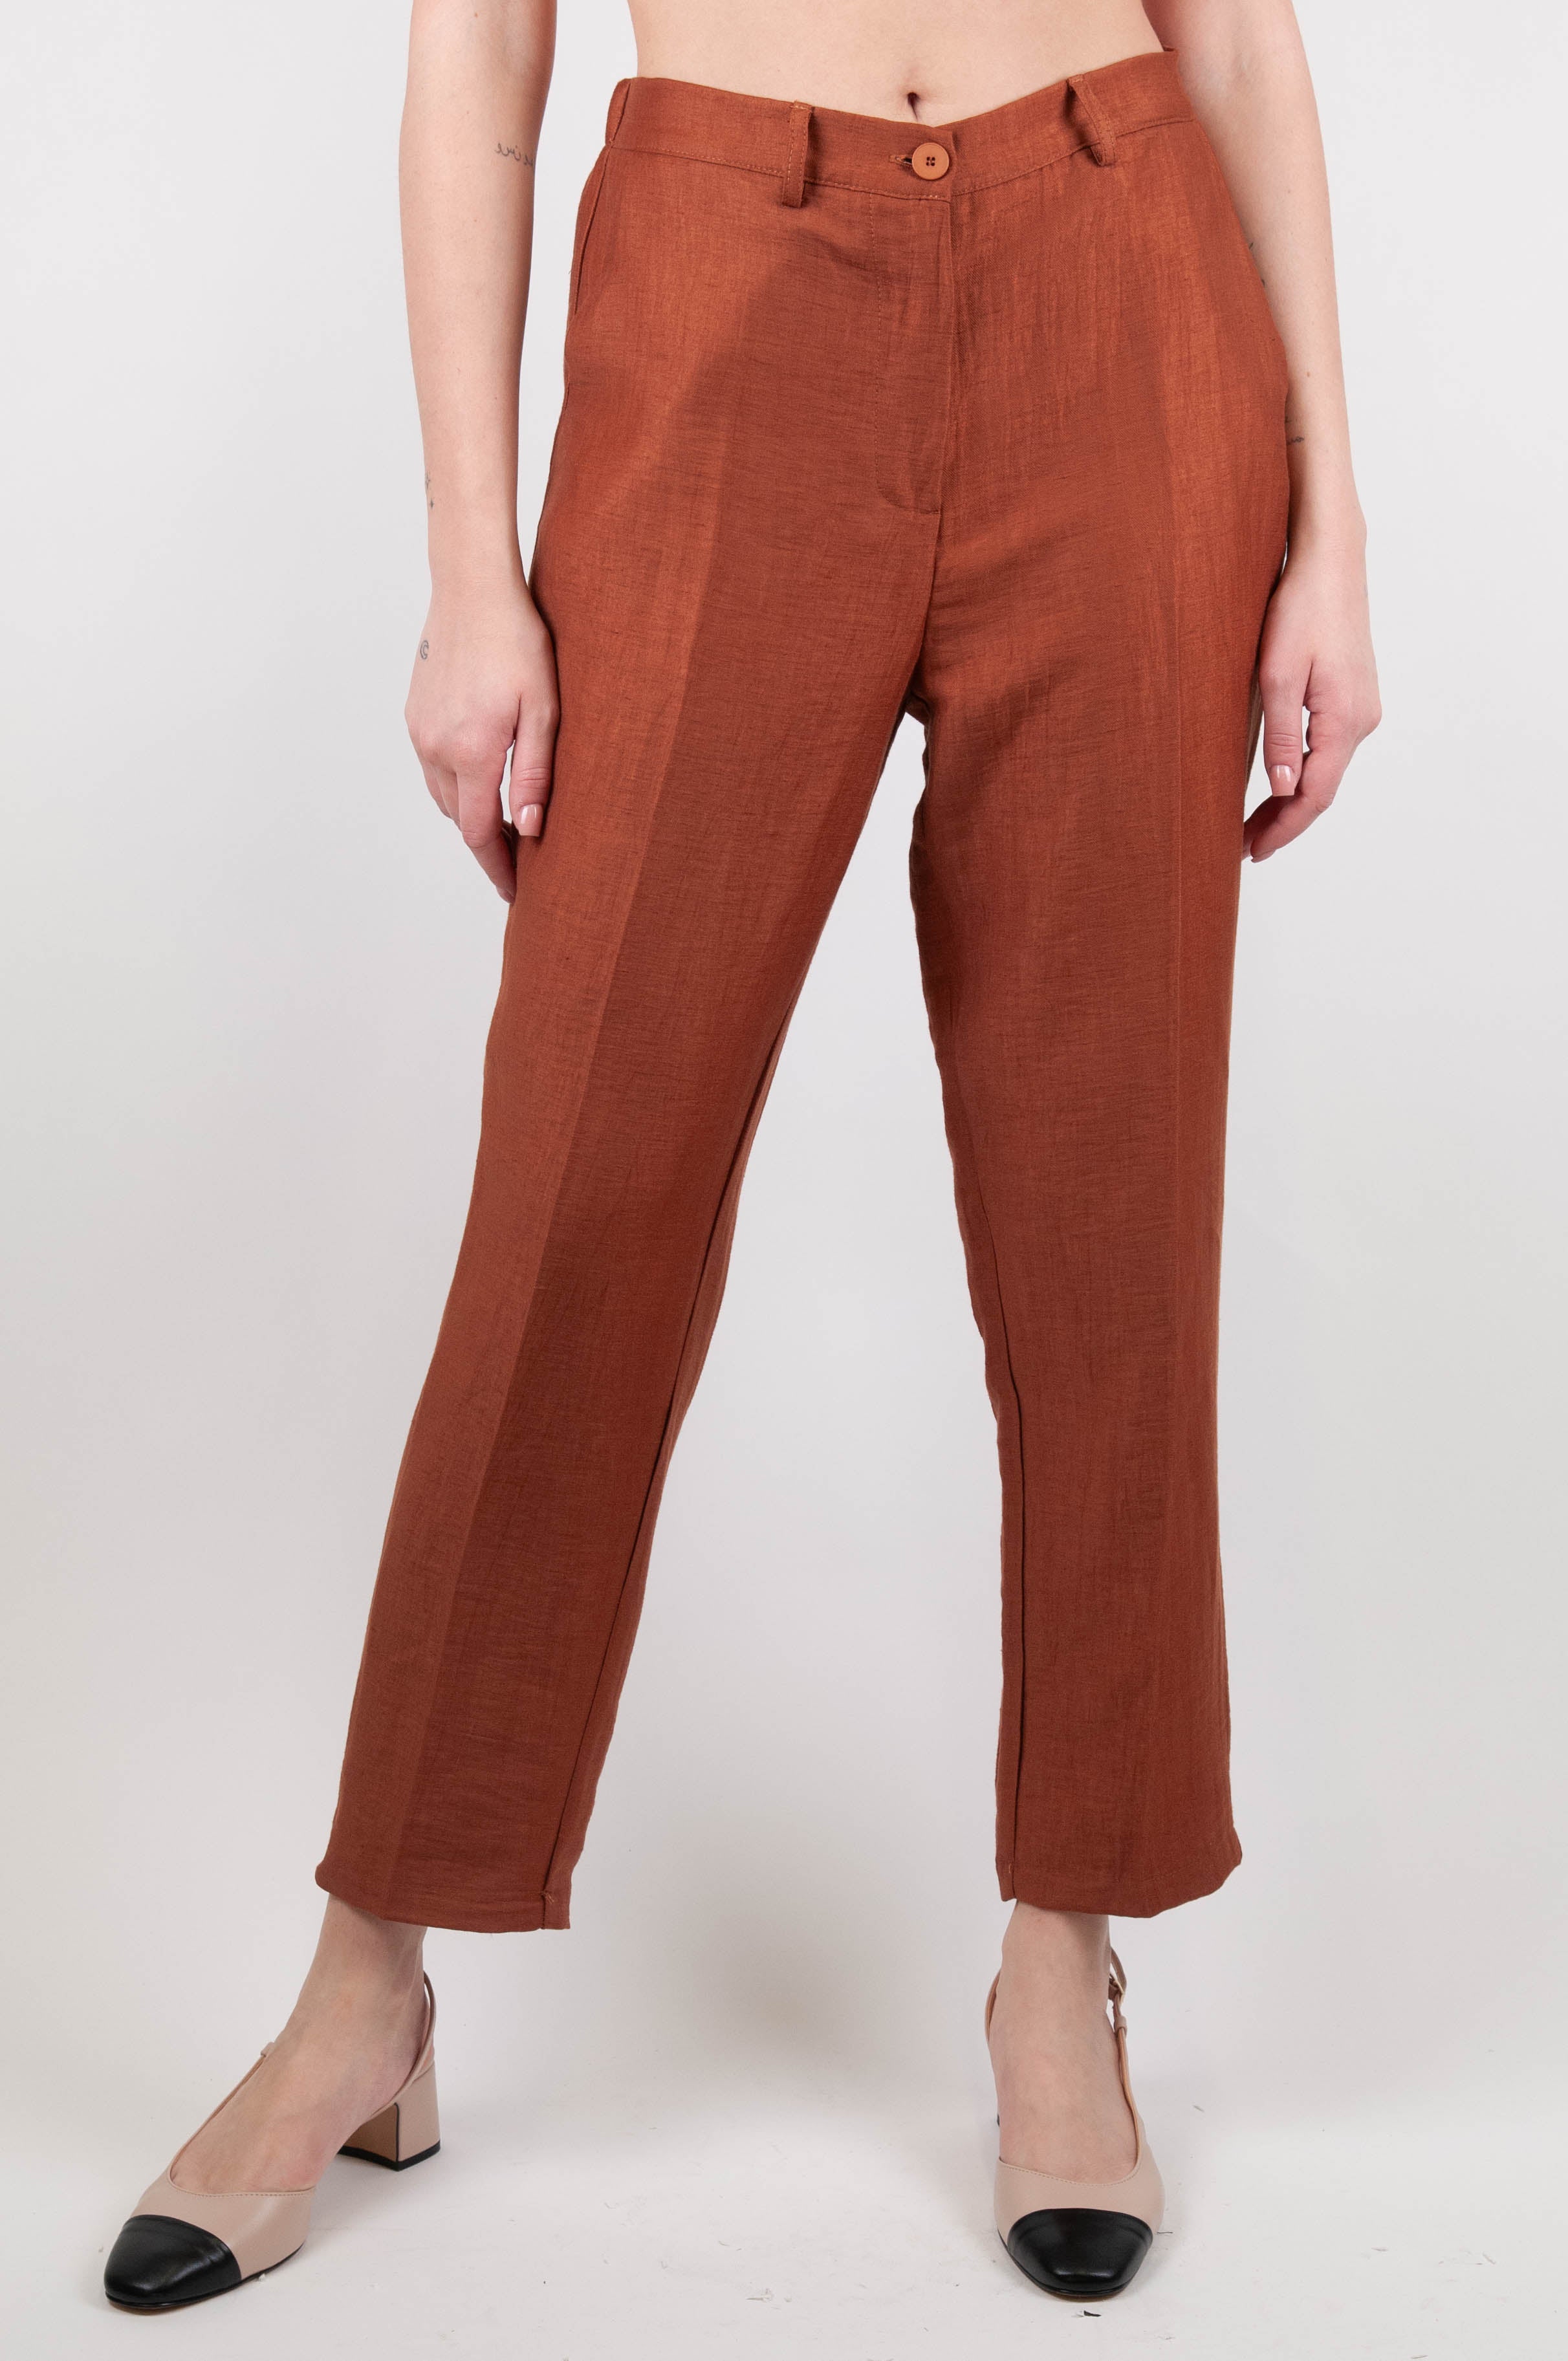 Dixie - Linen blend trousers with elastic on the back